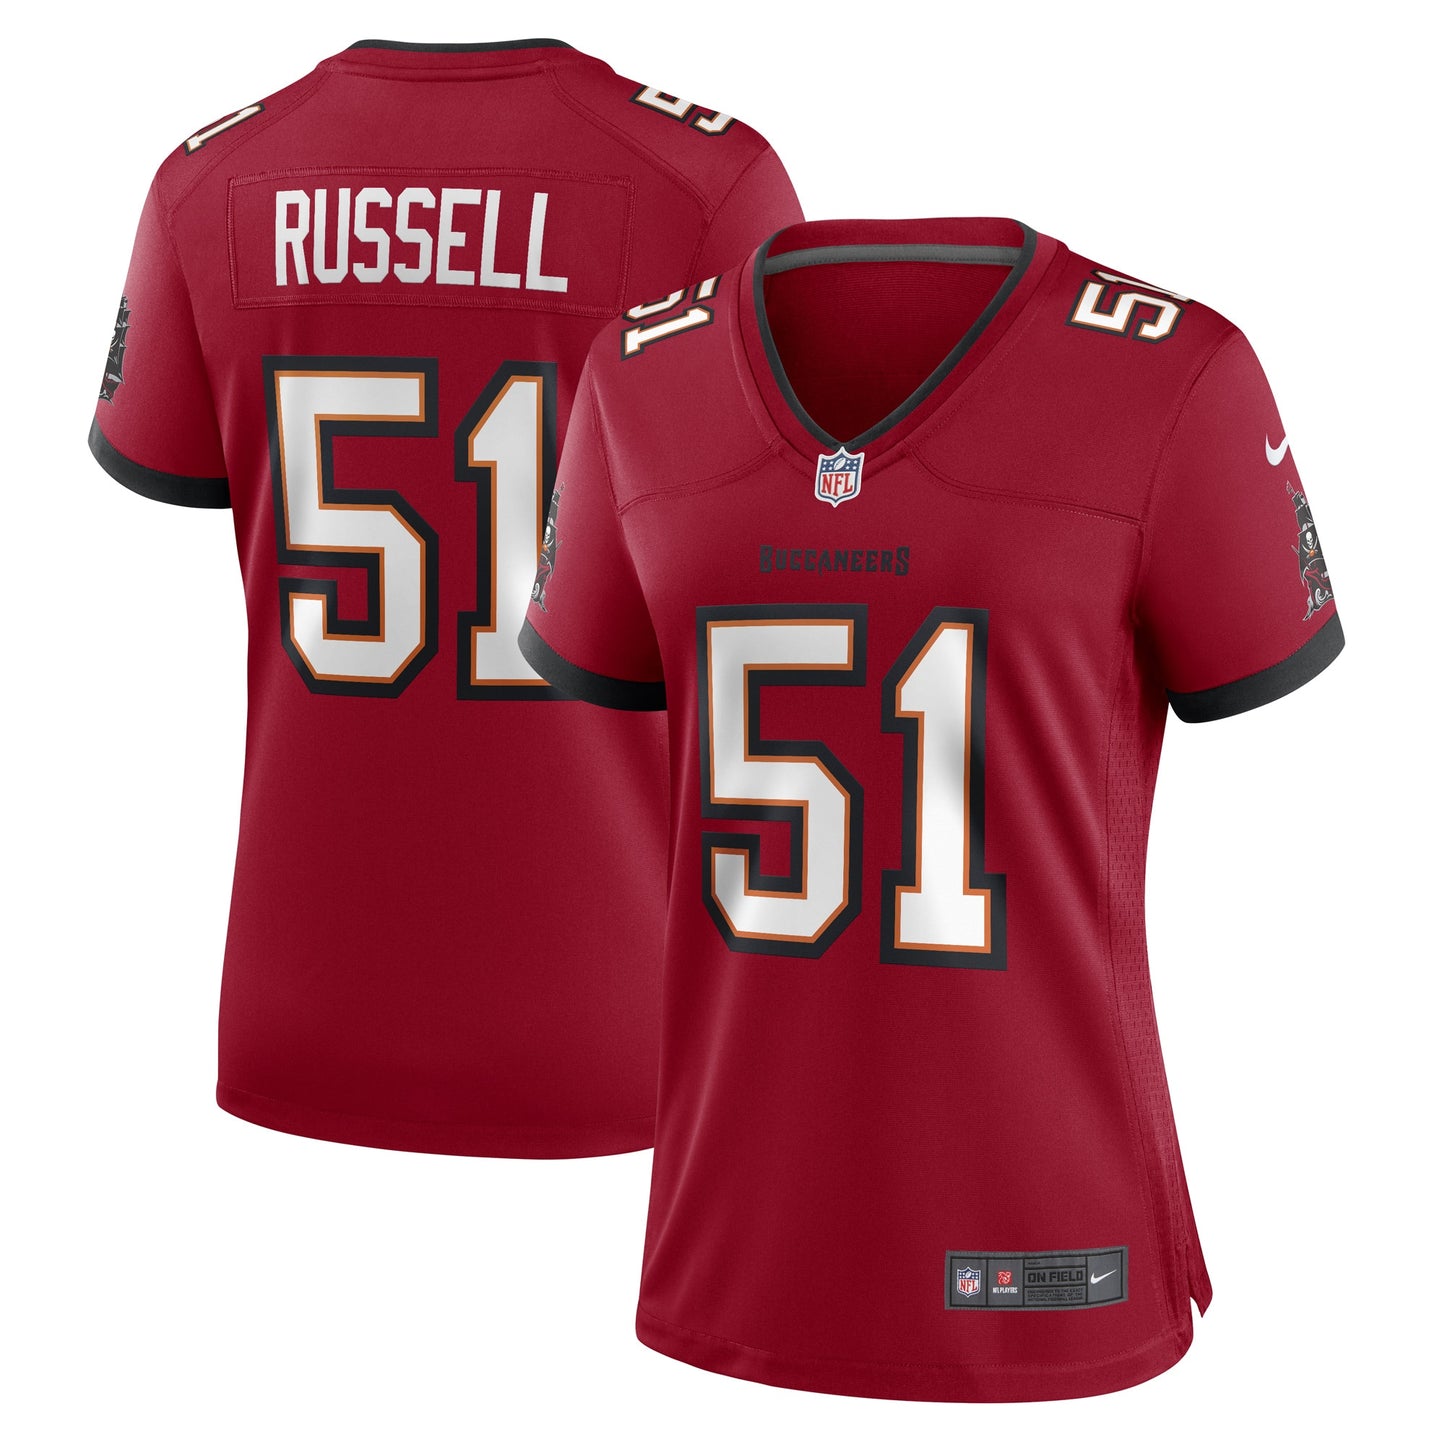 J.J. Russell Tampa Bay Buccaneers Nike Women's Game Player Jersey - Red